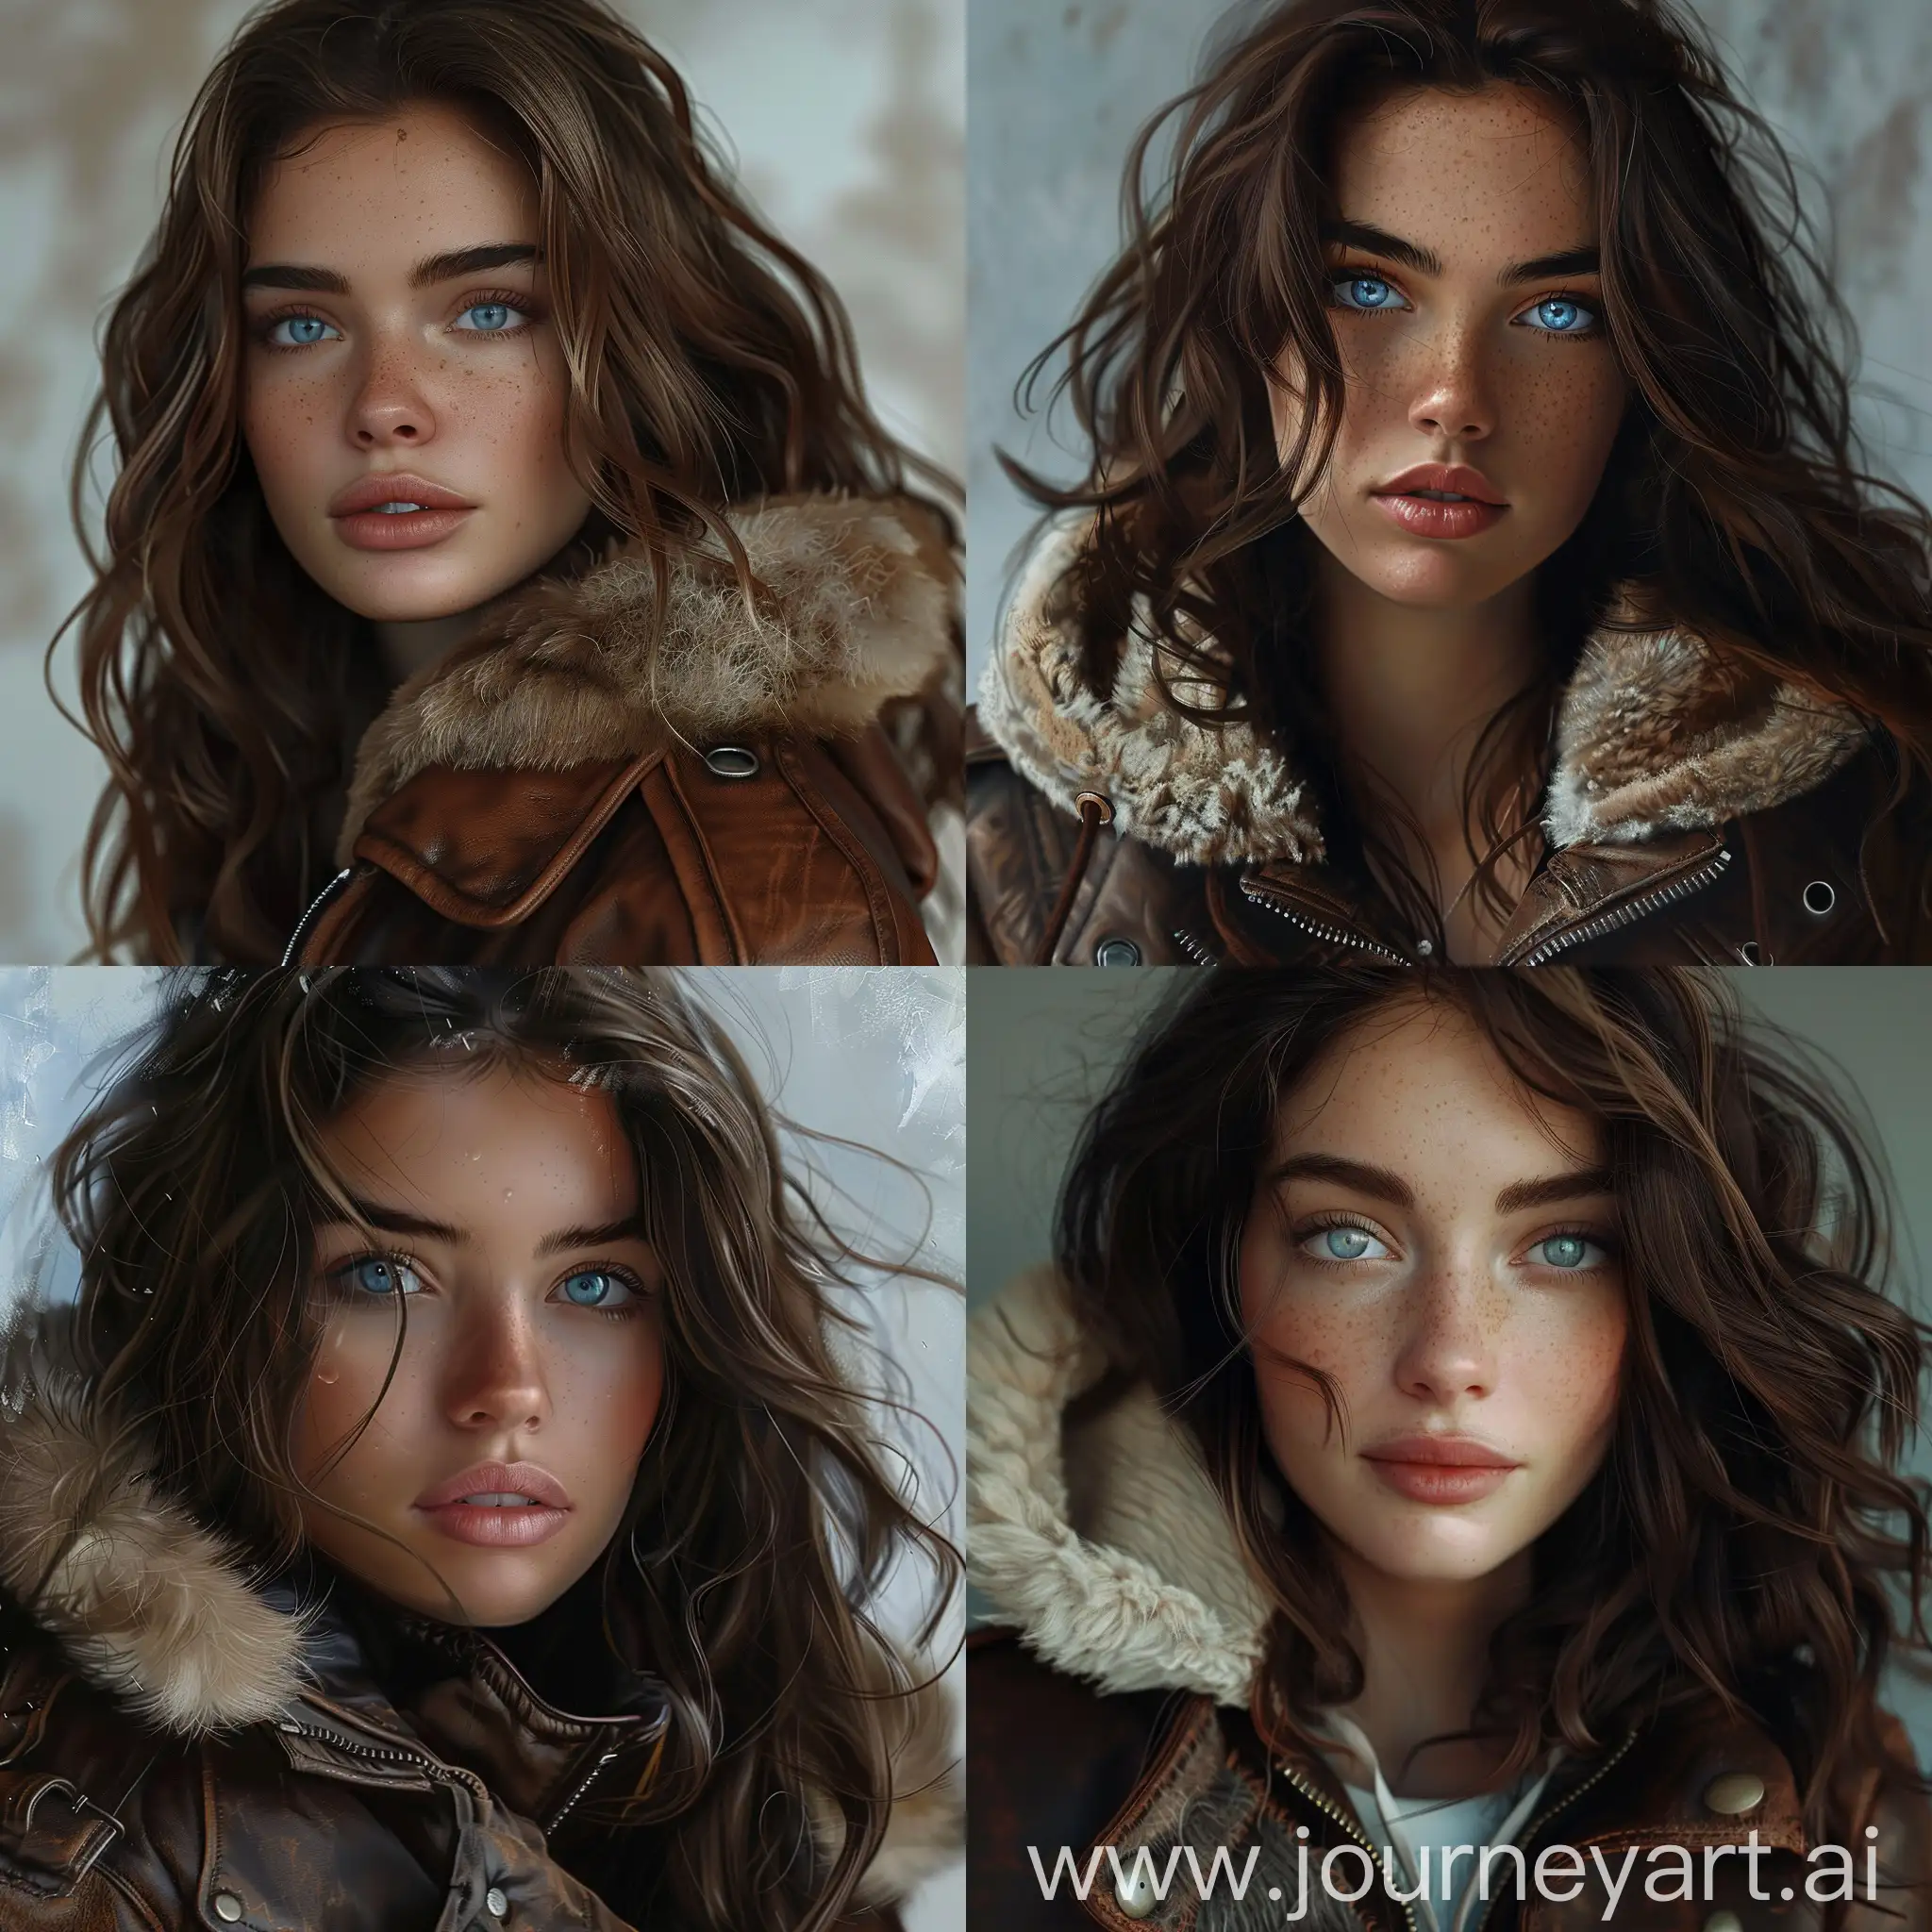 a girl with wavy brown hair that reaches her waist with light blue eyes, wearing a brown leather jacket with fur for the hoodie,and a mole beside her mouth